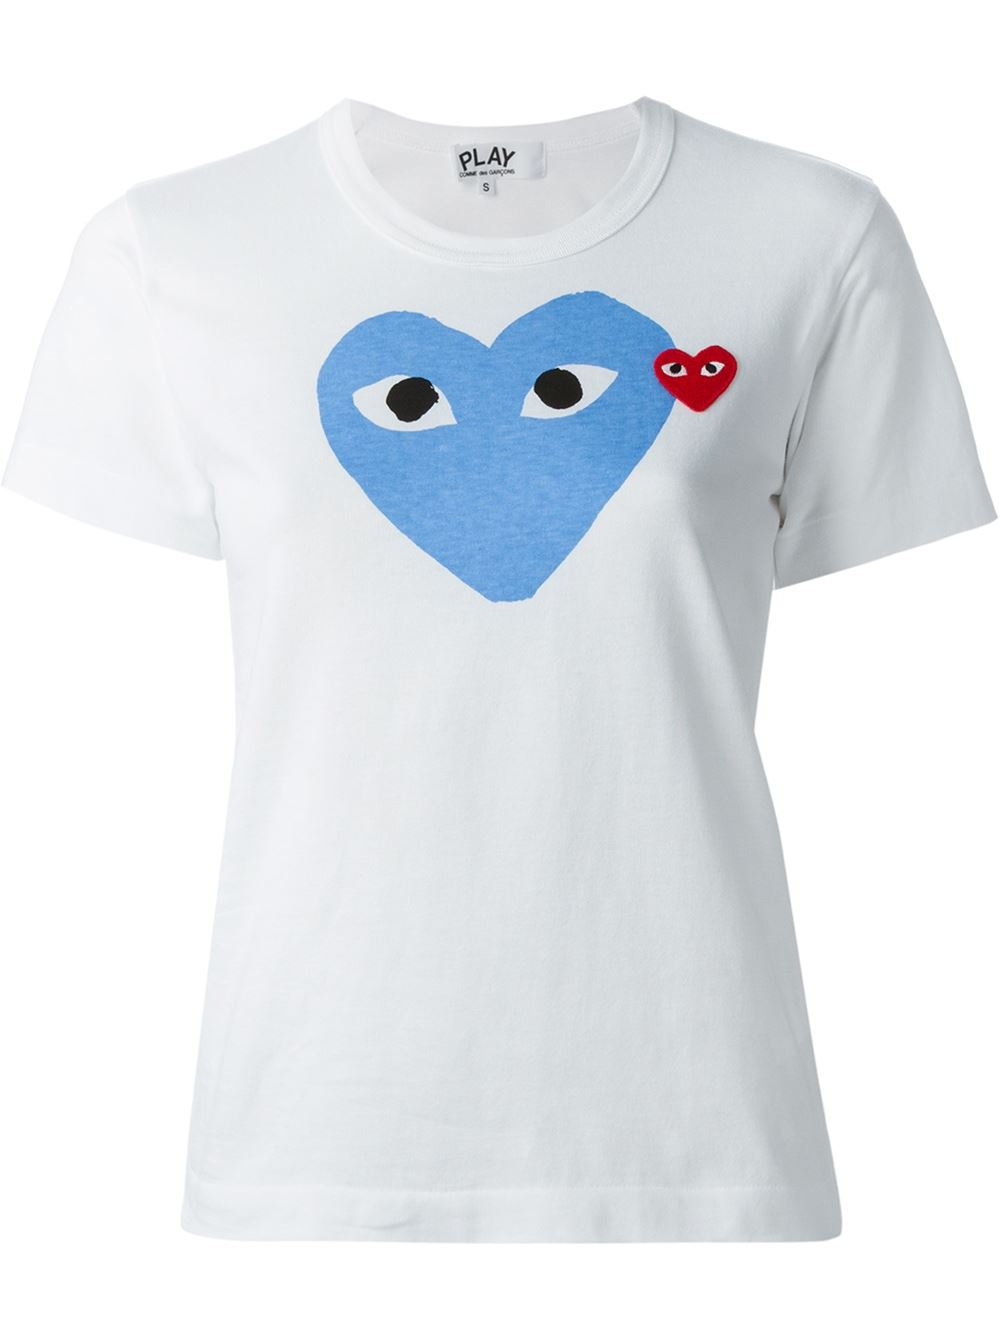 Play comme des garçons Printed Heart T-shirt in White | Lyst